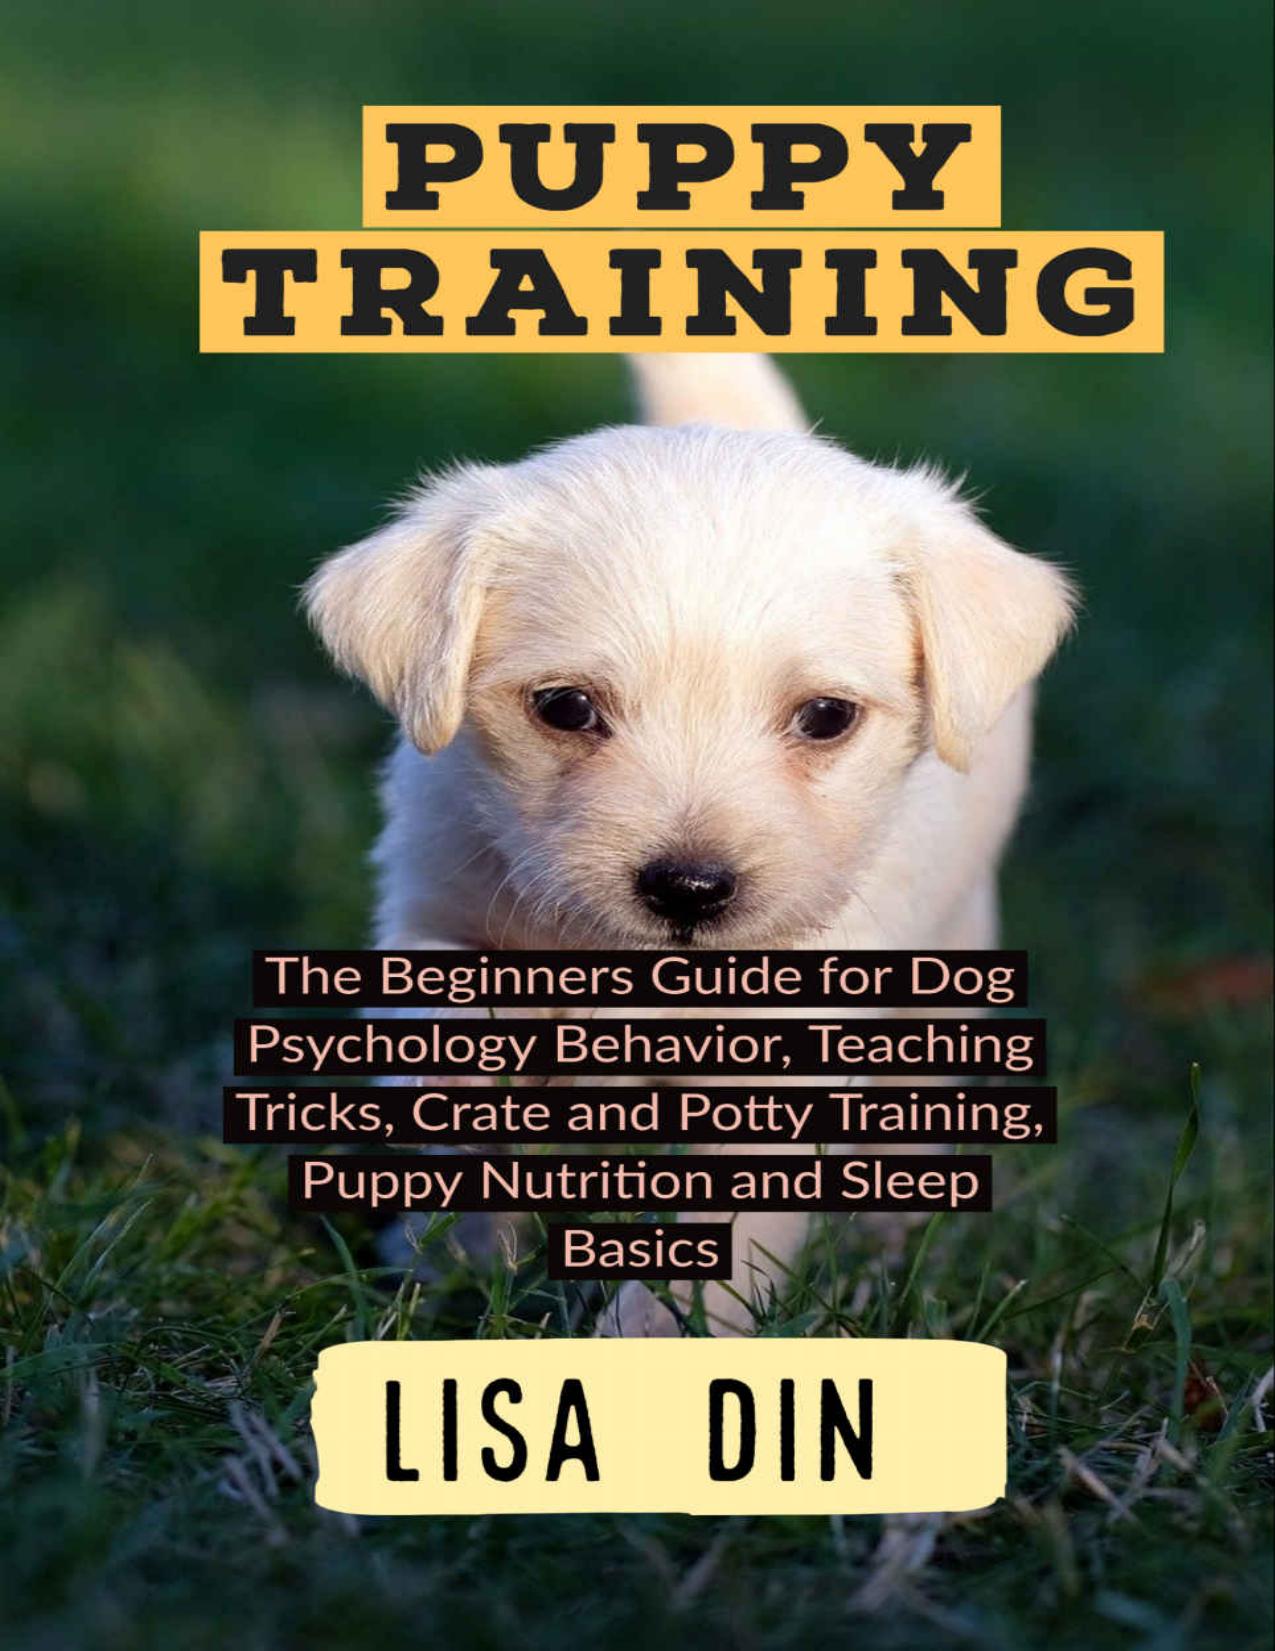 Puppy Training: The Beginners Guide for Dog Psychology Behavior, Teaching Tricks, Crate and Potty Training, Puppy Nutrition and Sleep Basics by Lisa Din